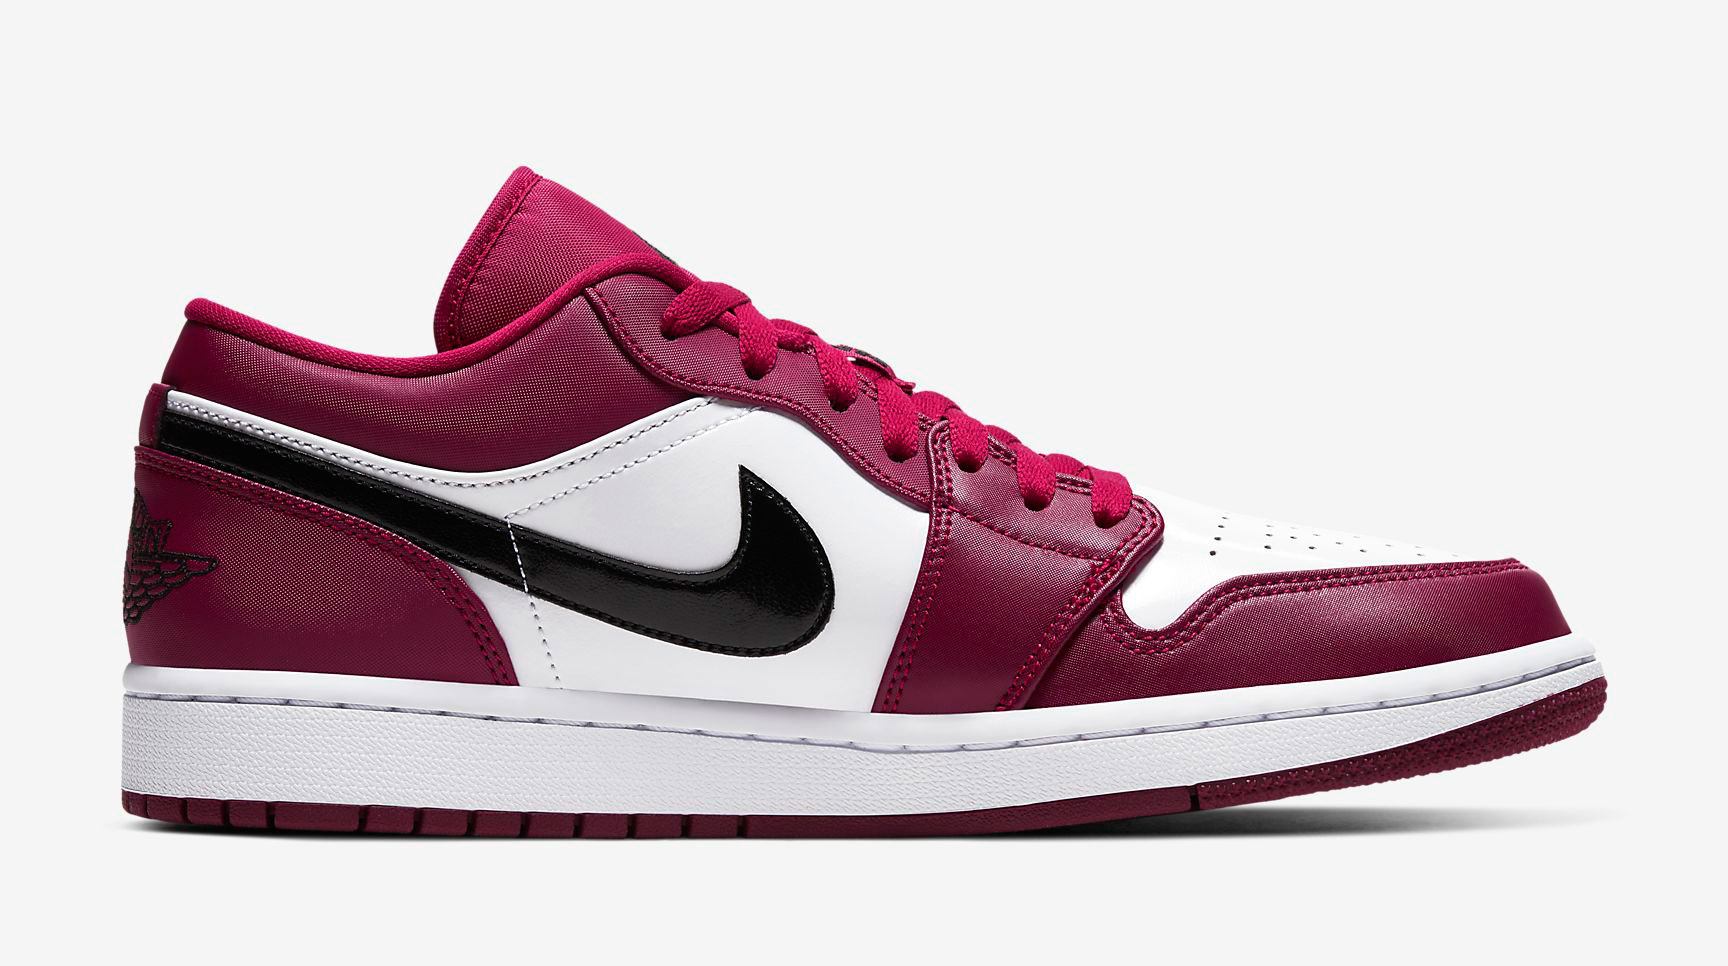 Air Jordan 1 Low Noble Red Available Now | SneakerFits.com